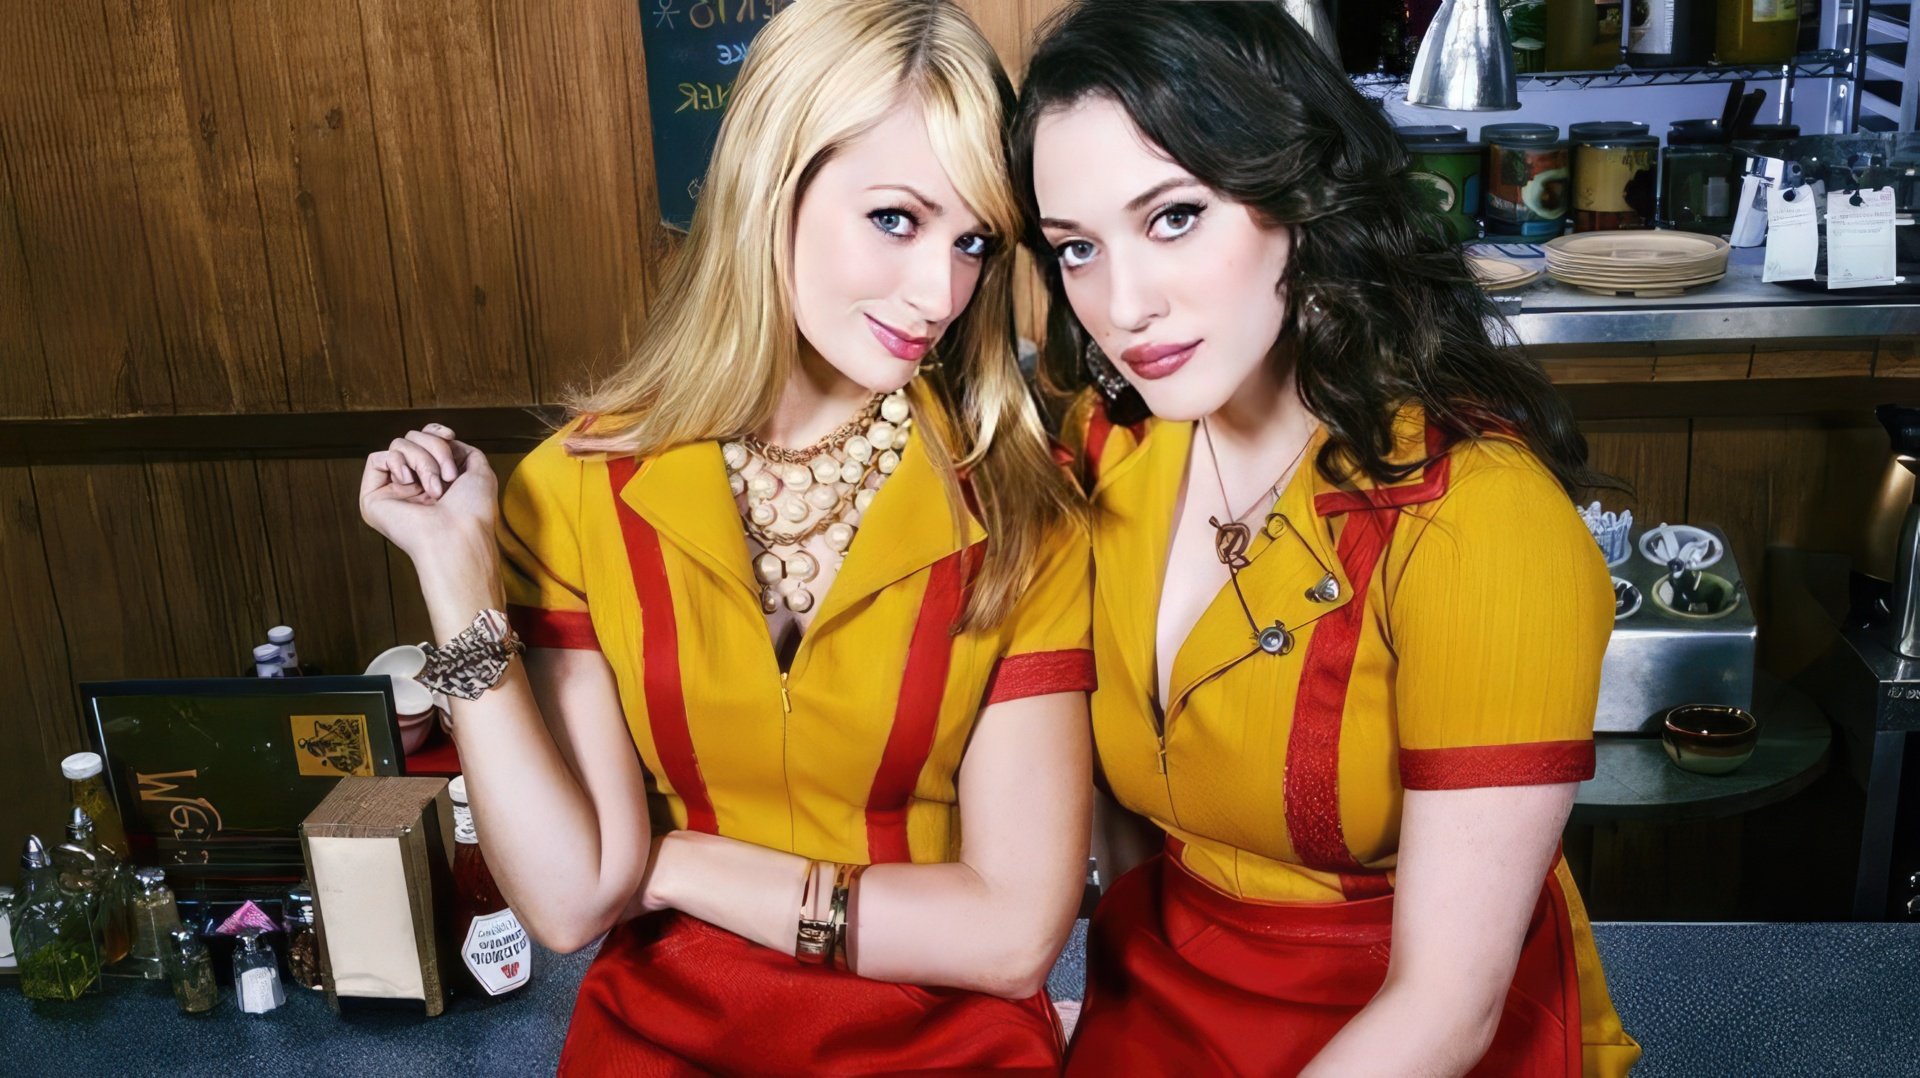 Kat Dennings and Beth Behrs in the Sitcom 2 Broke Girls